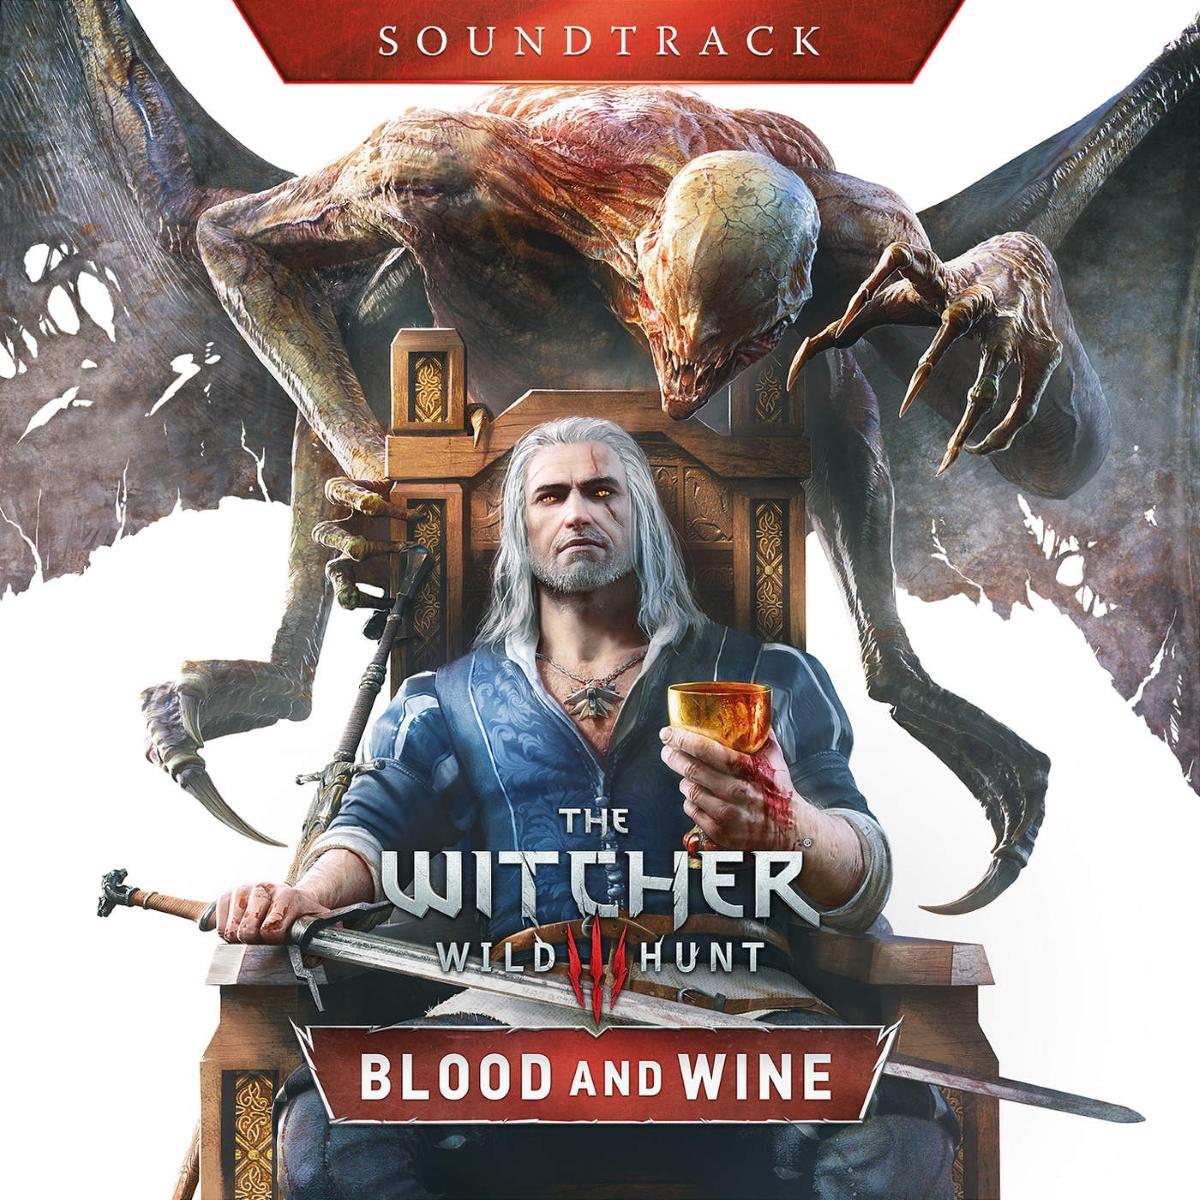 The witcher 3 soundtrack flac фото 2